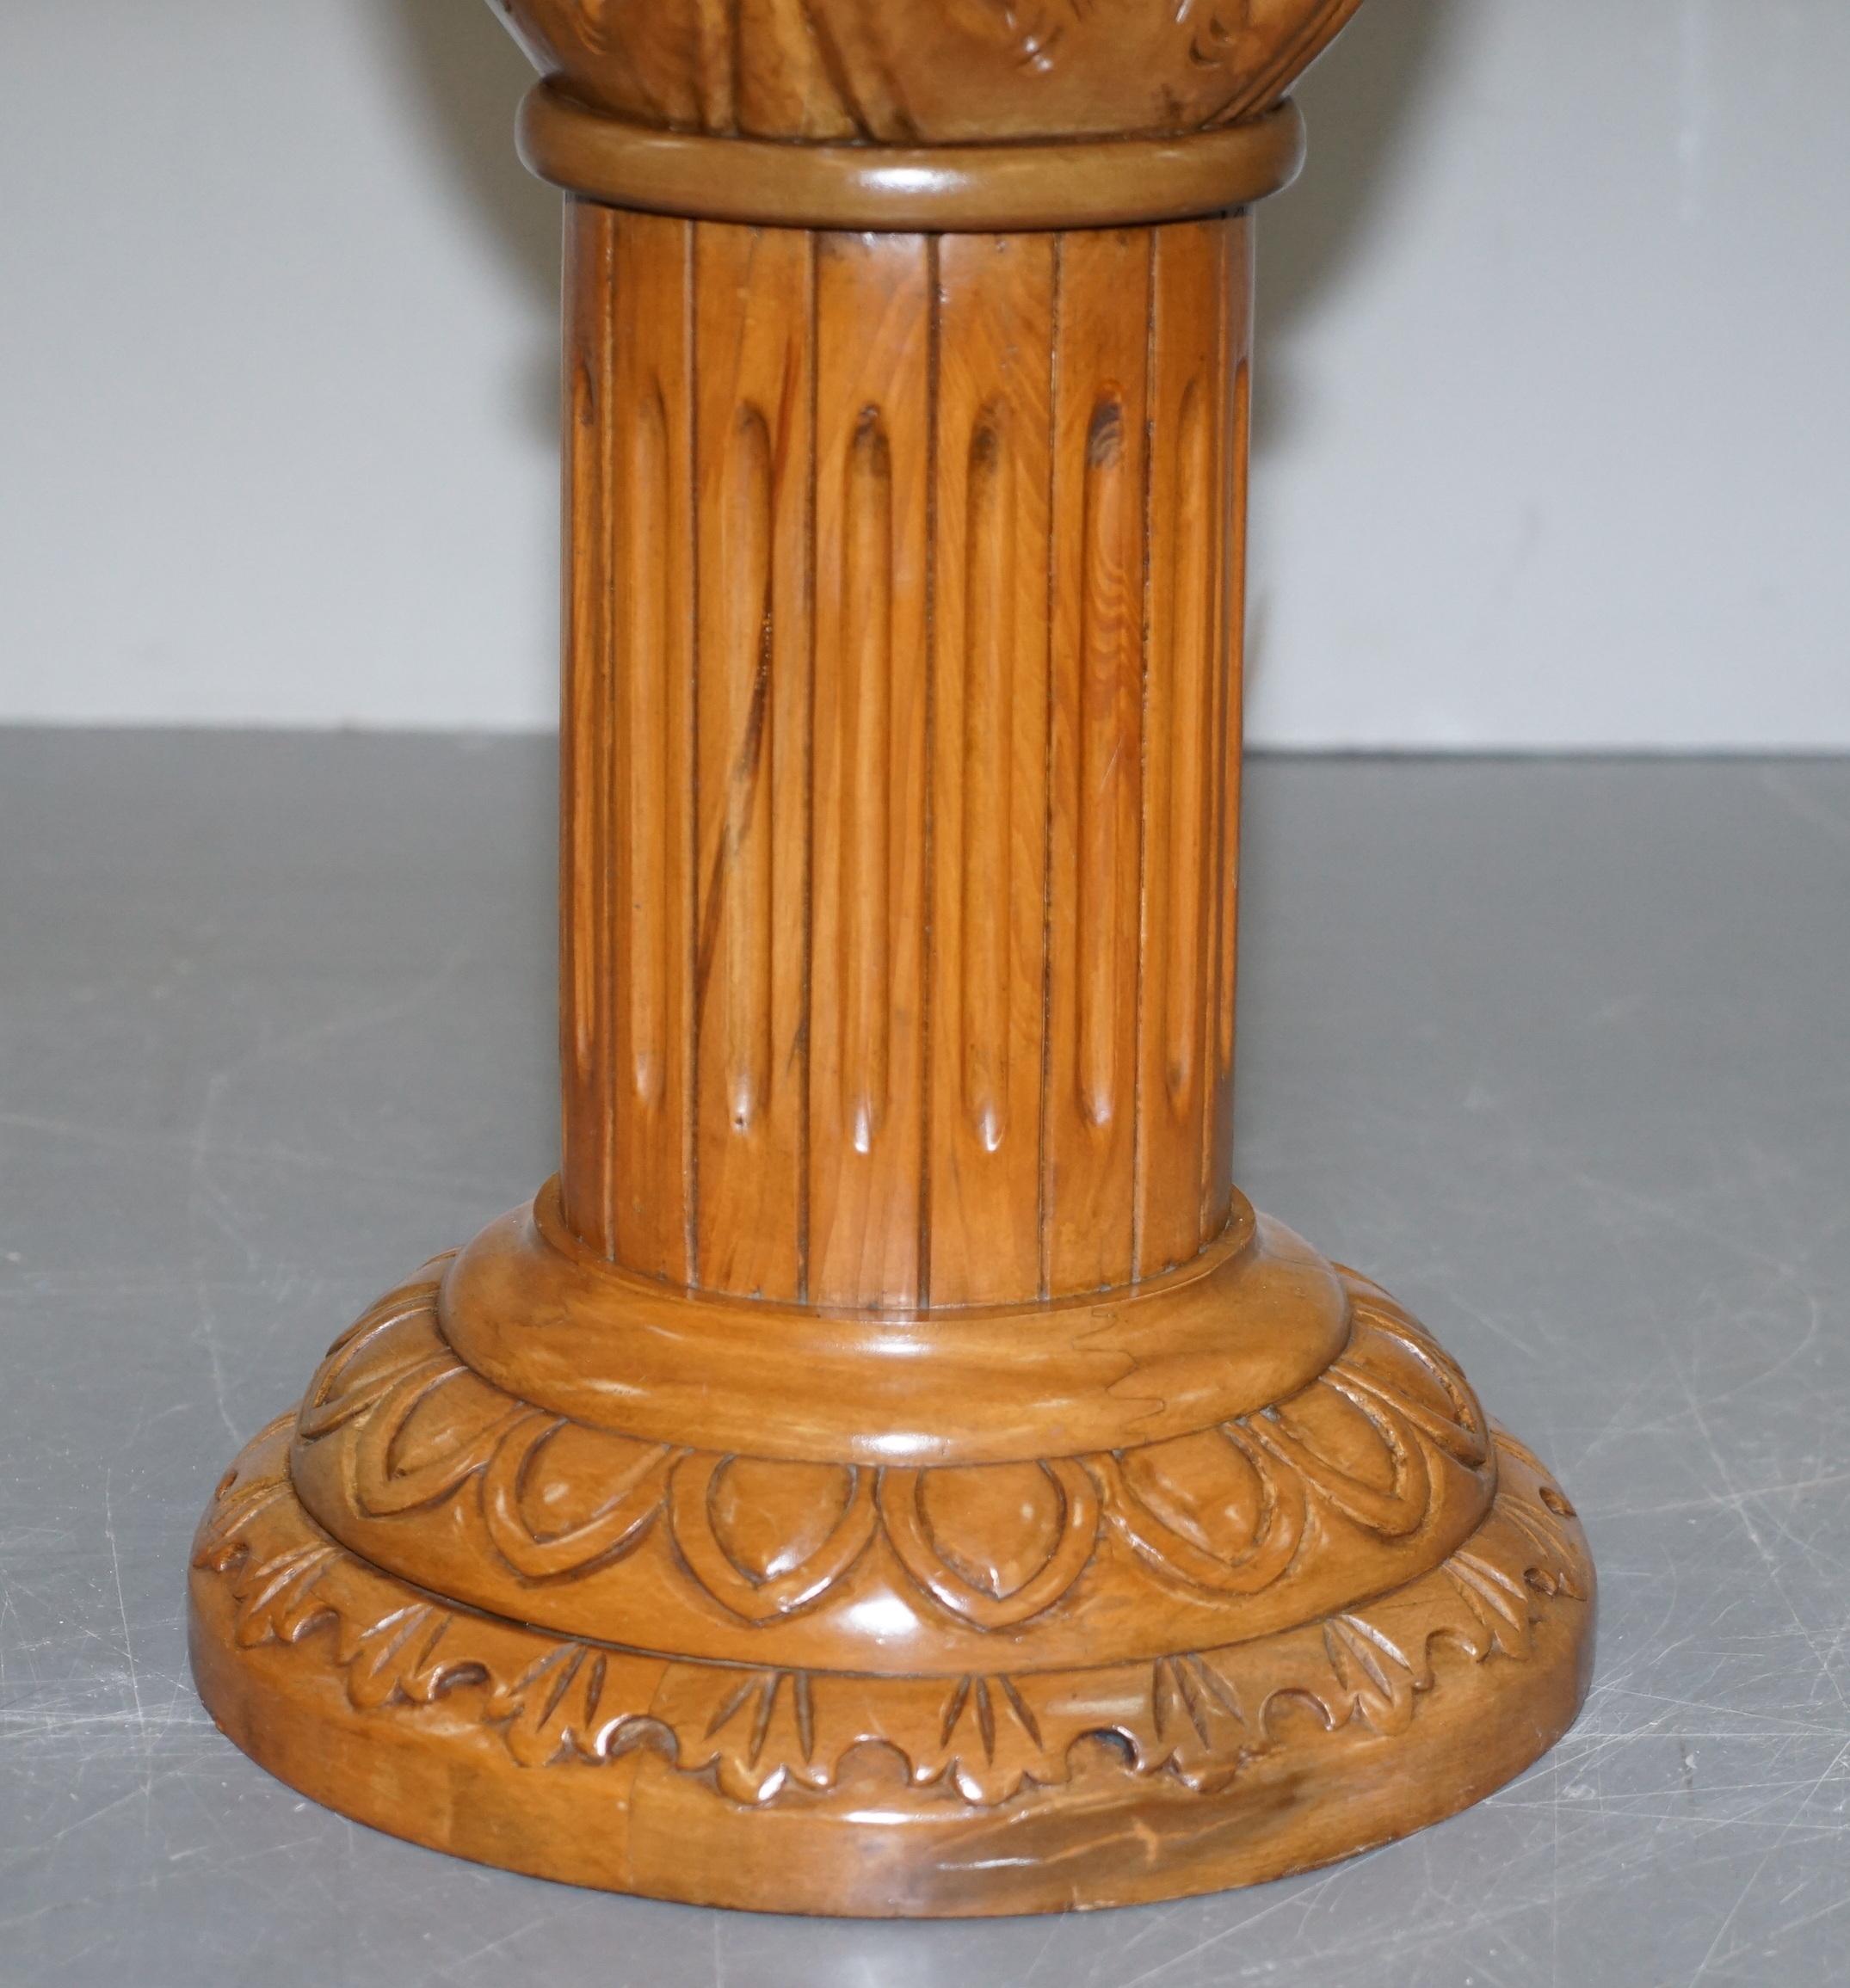 Hand-Crafted Side Table Sized Corithian Pillar Jardiniere in Hardwood with Italian Marble Top